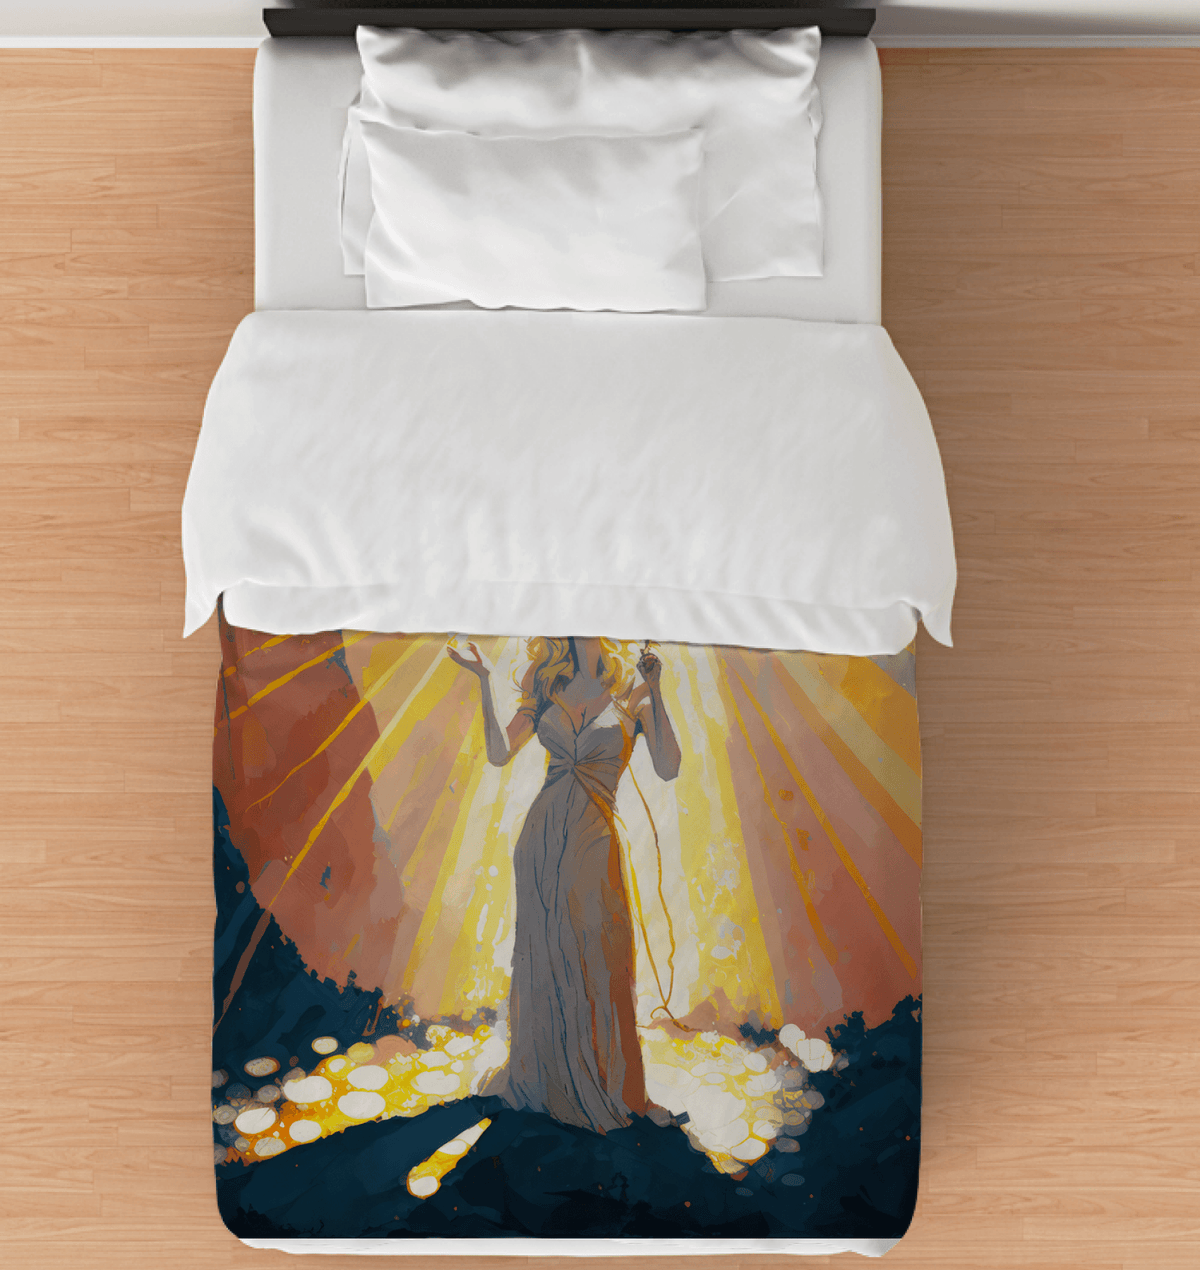 SurArt 71 Duvet Cover showcasing its contemporary design on a cozy bed setting.